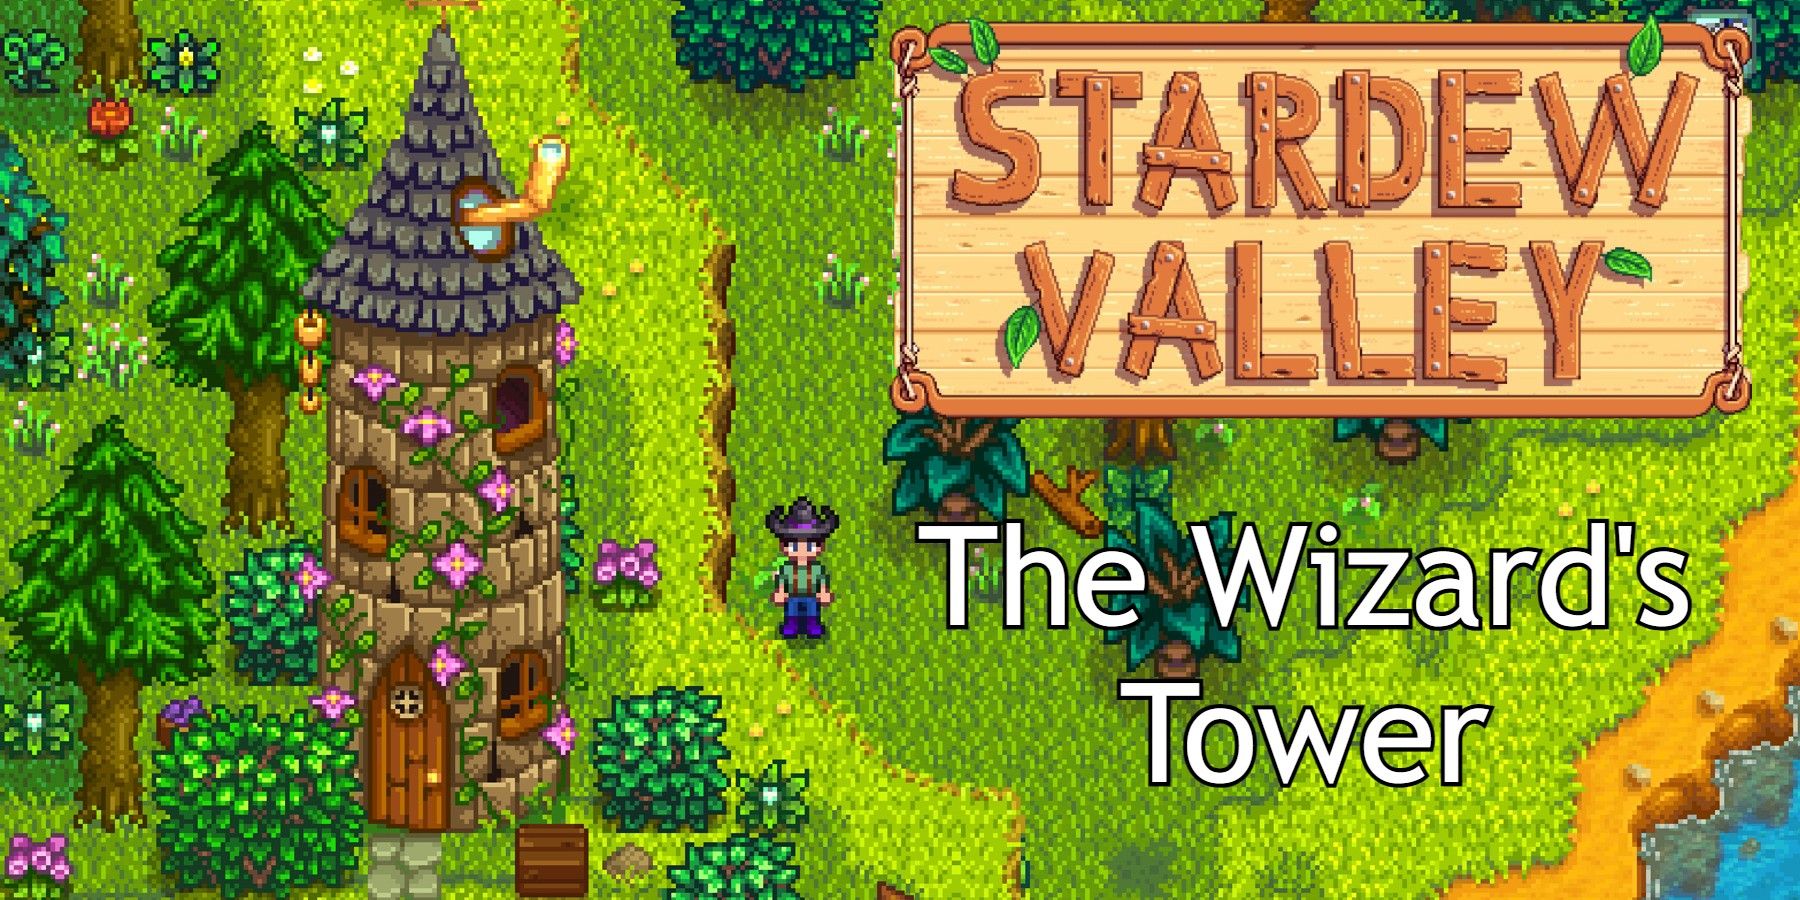 stardew valley wizard tower and logo